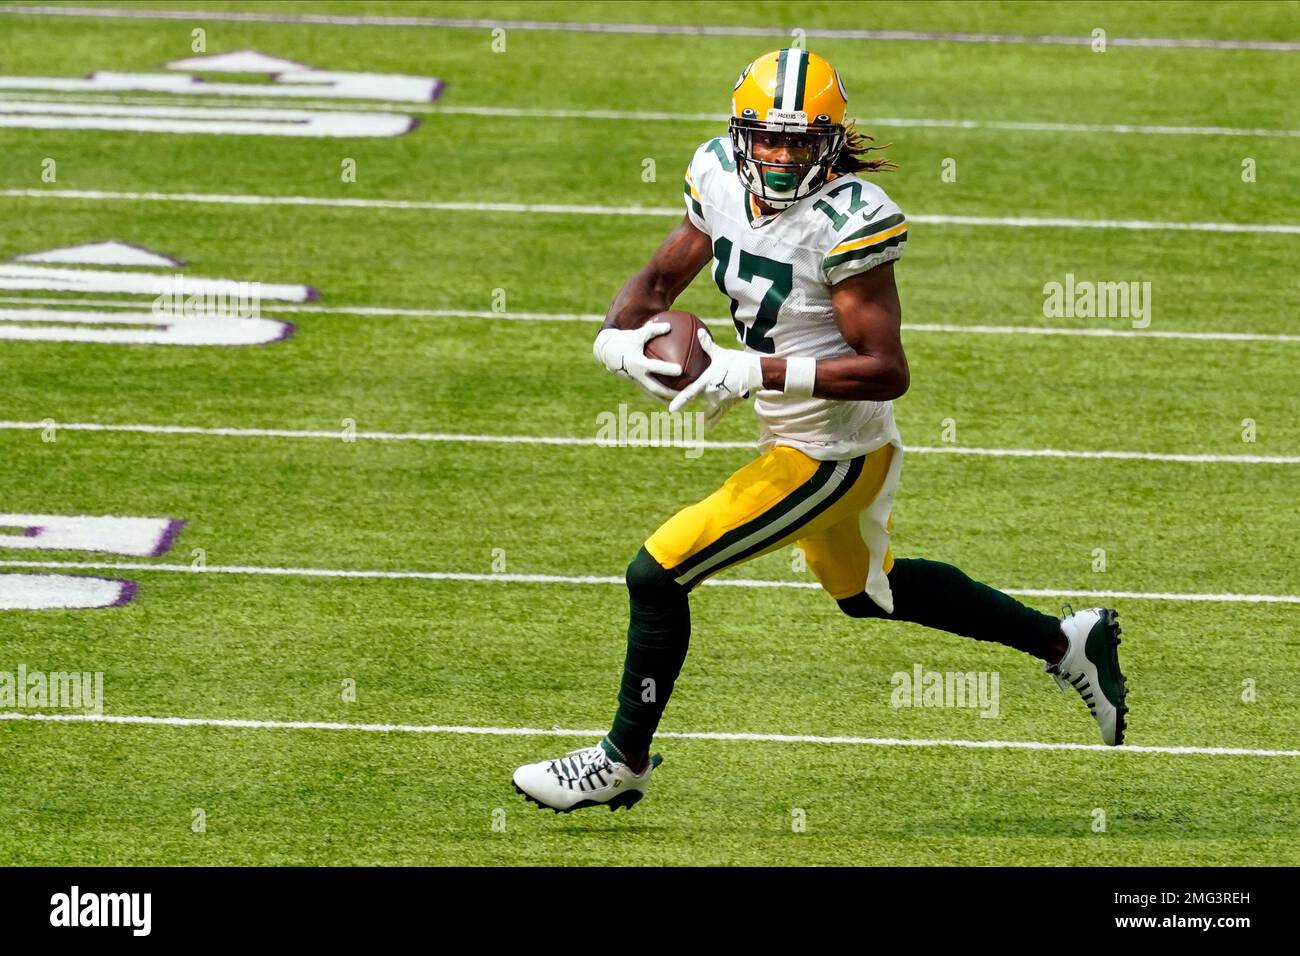 Green Bay Packers wide receiver Davante Adams (17) carries the ball in the first half of an NFL football game, against the Minnesota Vikings, Sunday, Sept. 13, 2020, in Minneapolis. (AP Photo/Jim Mone) Stock Photo